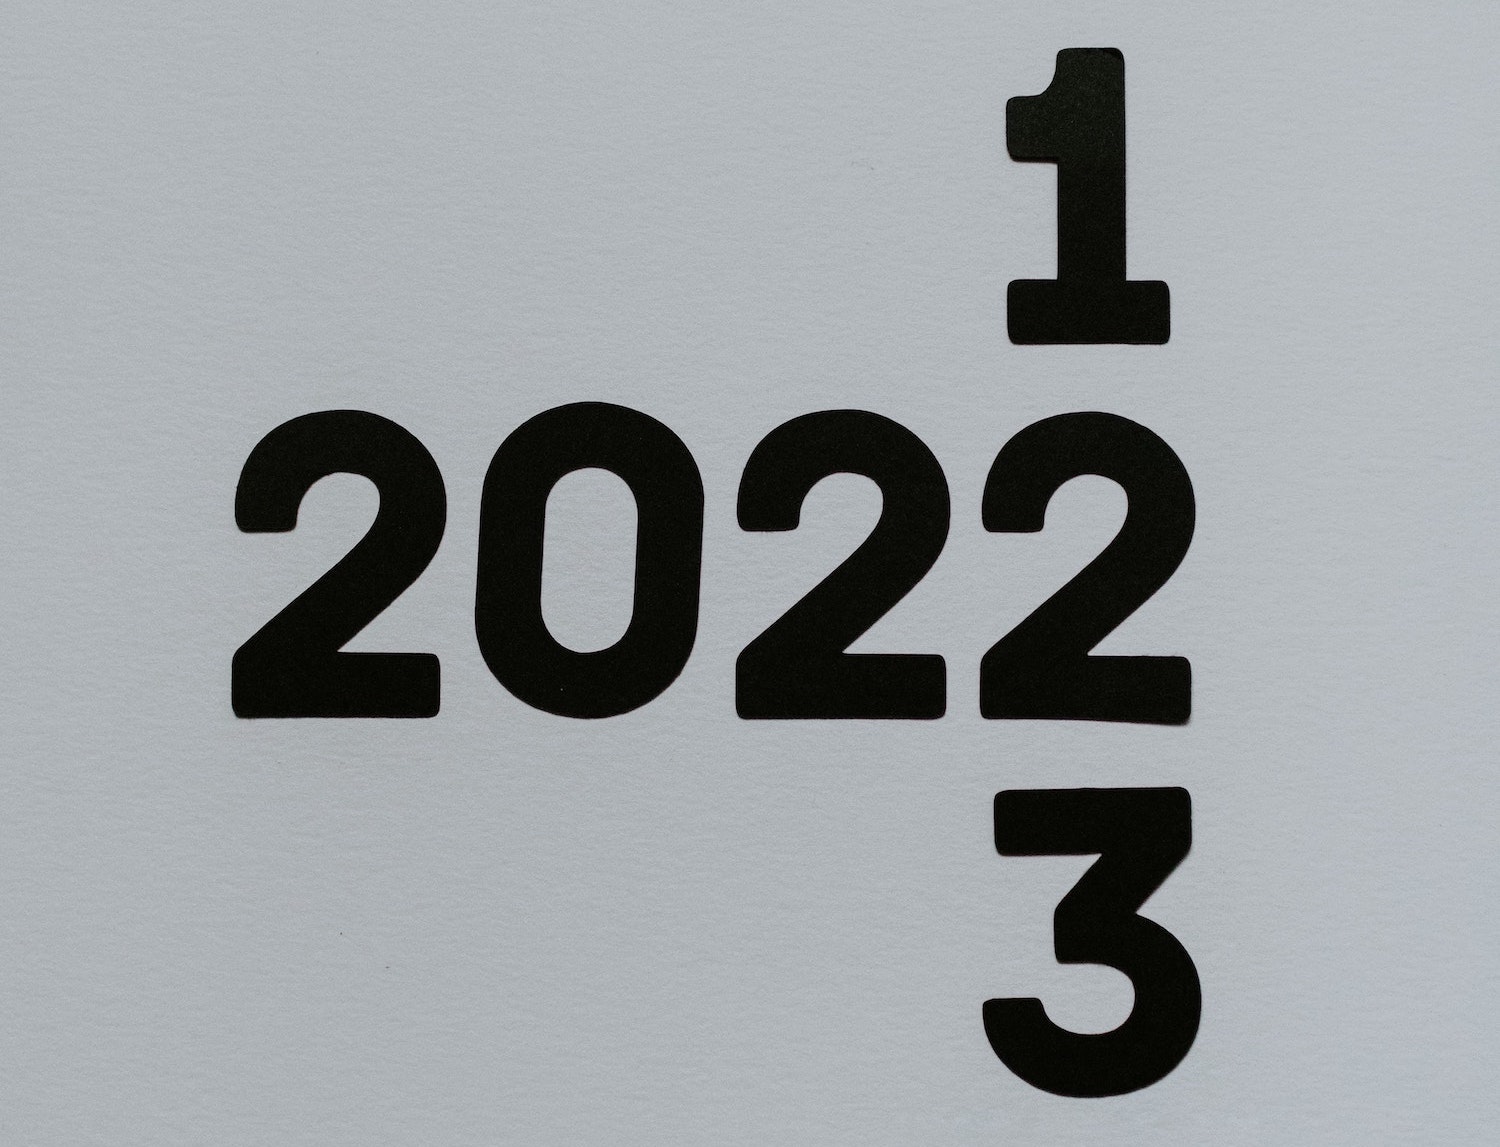 2022 looked like this